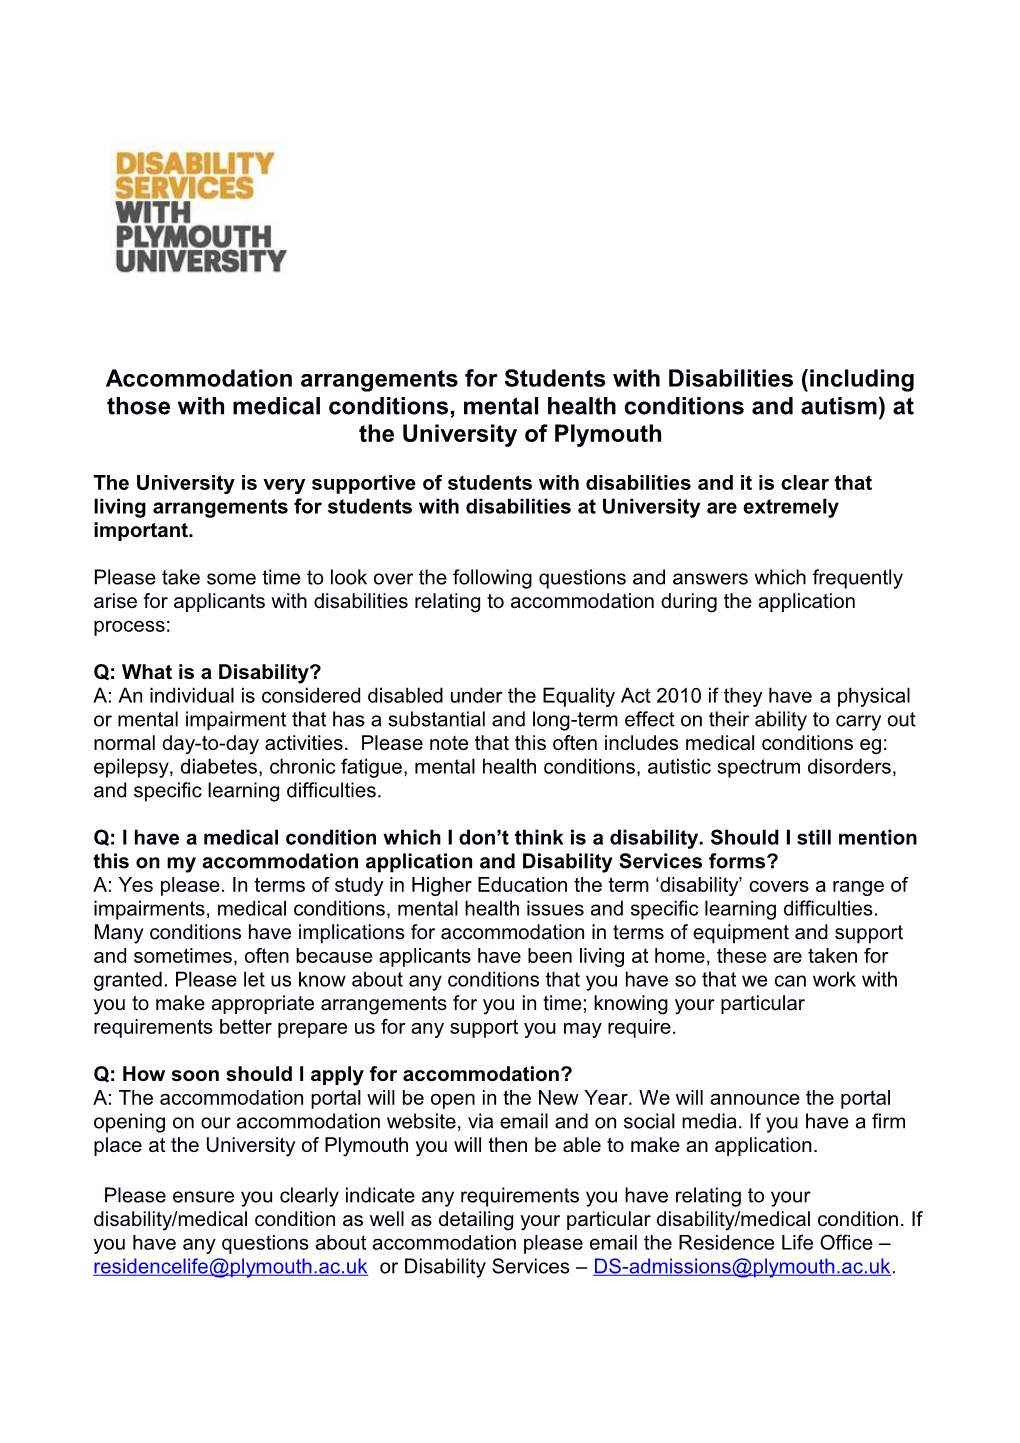 Accommodation Arrangements for Students with Disabilities (Including Those with Medical